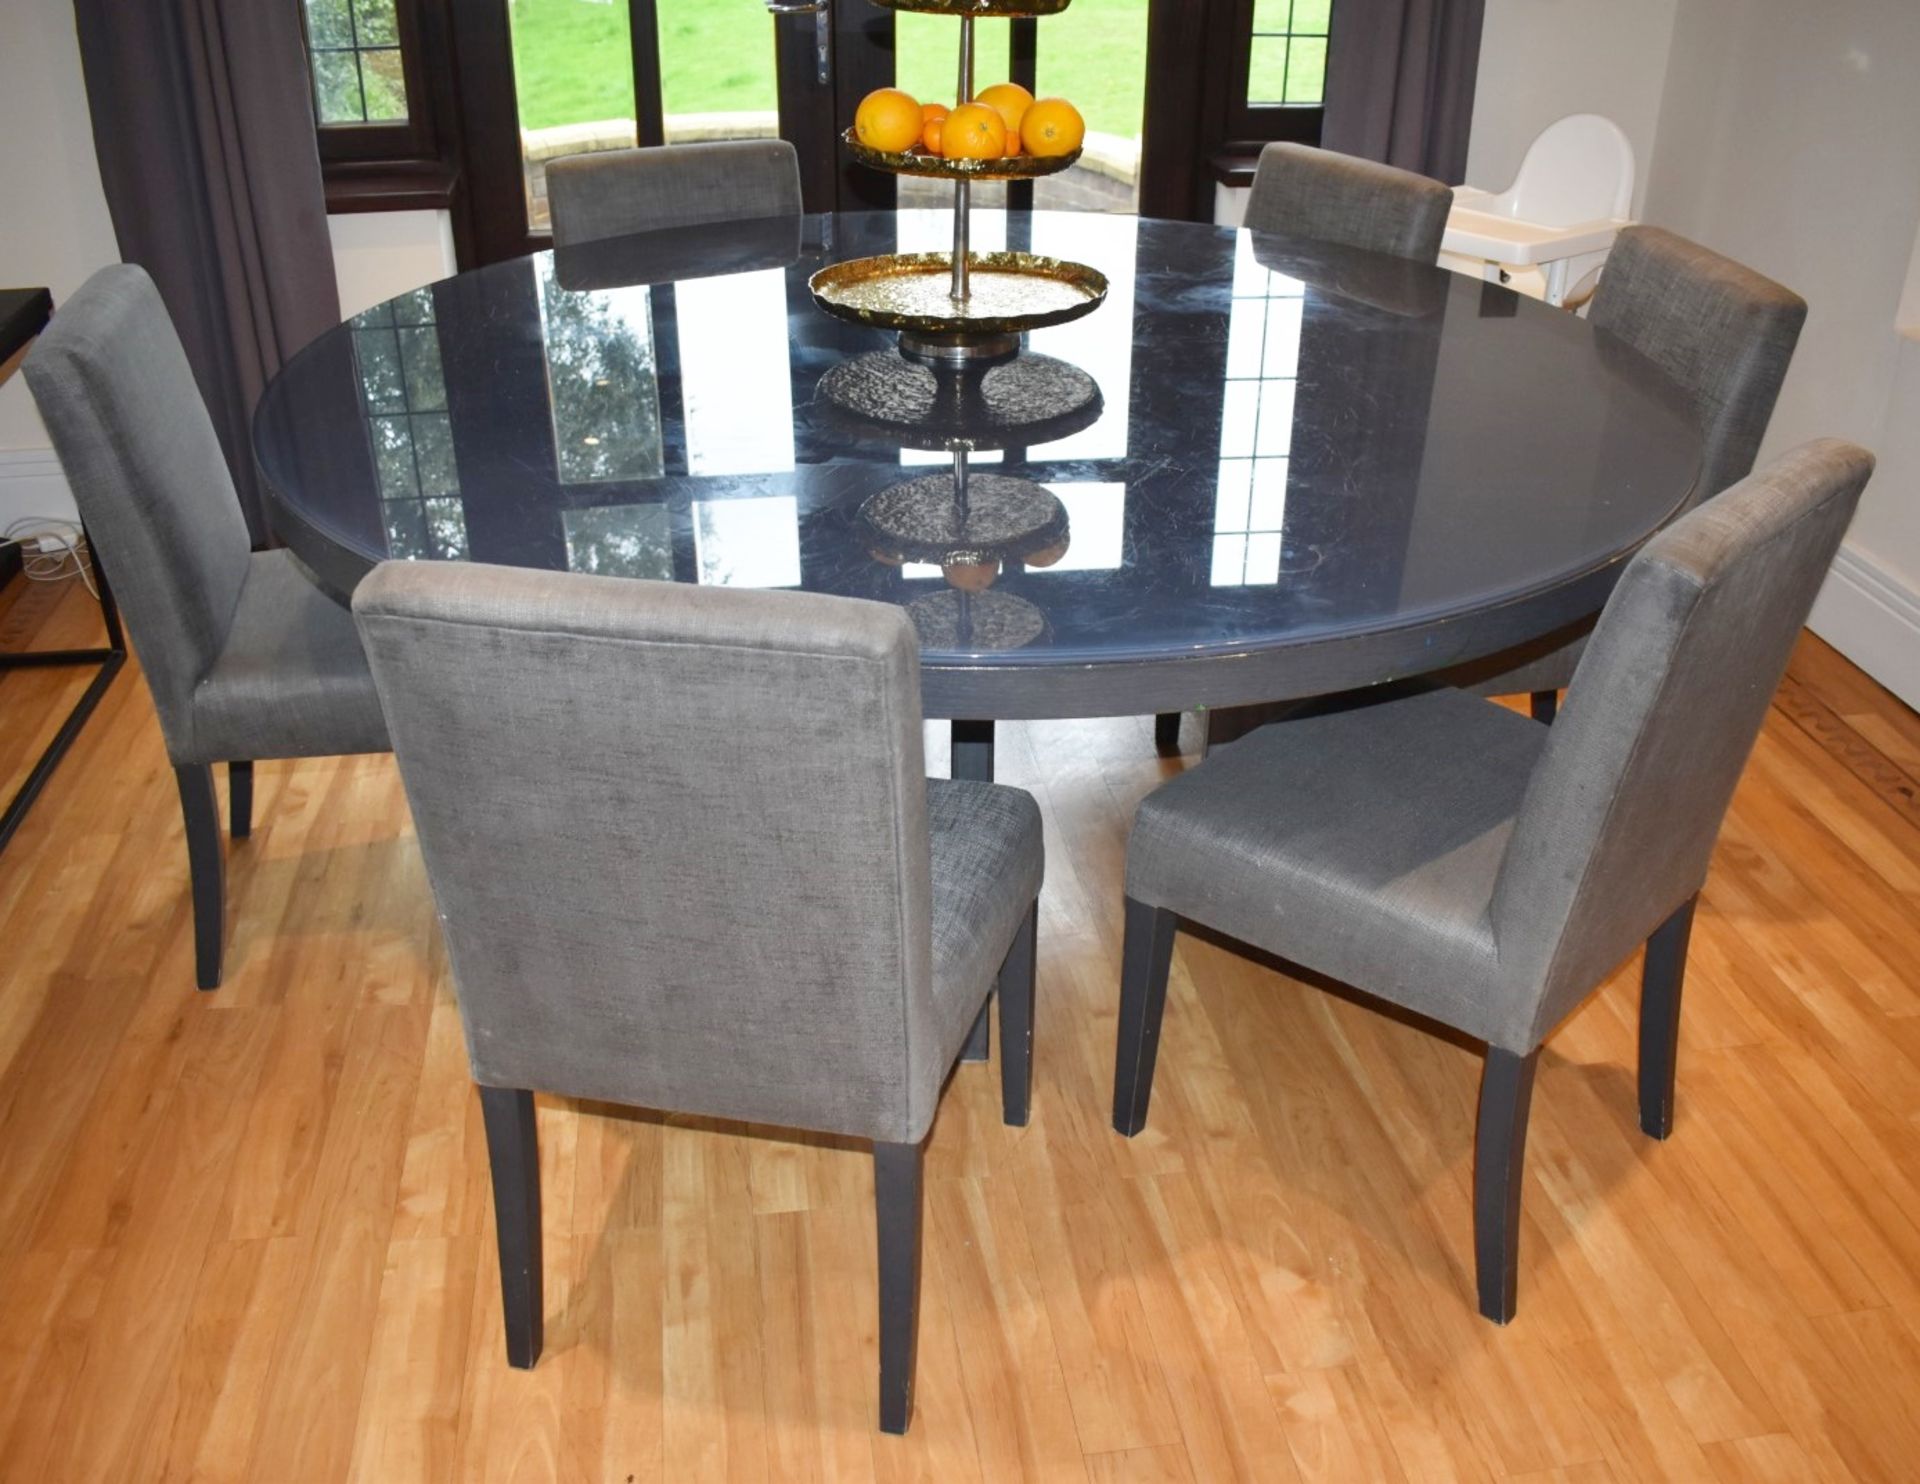 1 x Contemporary Dining Table With Six Chairs - Wenge Wood Round Table With Glass Protector and